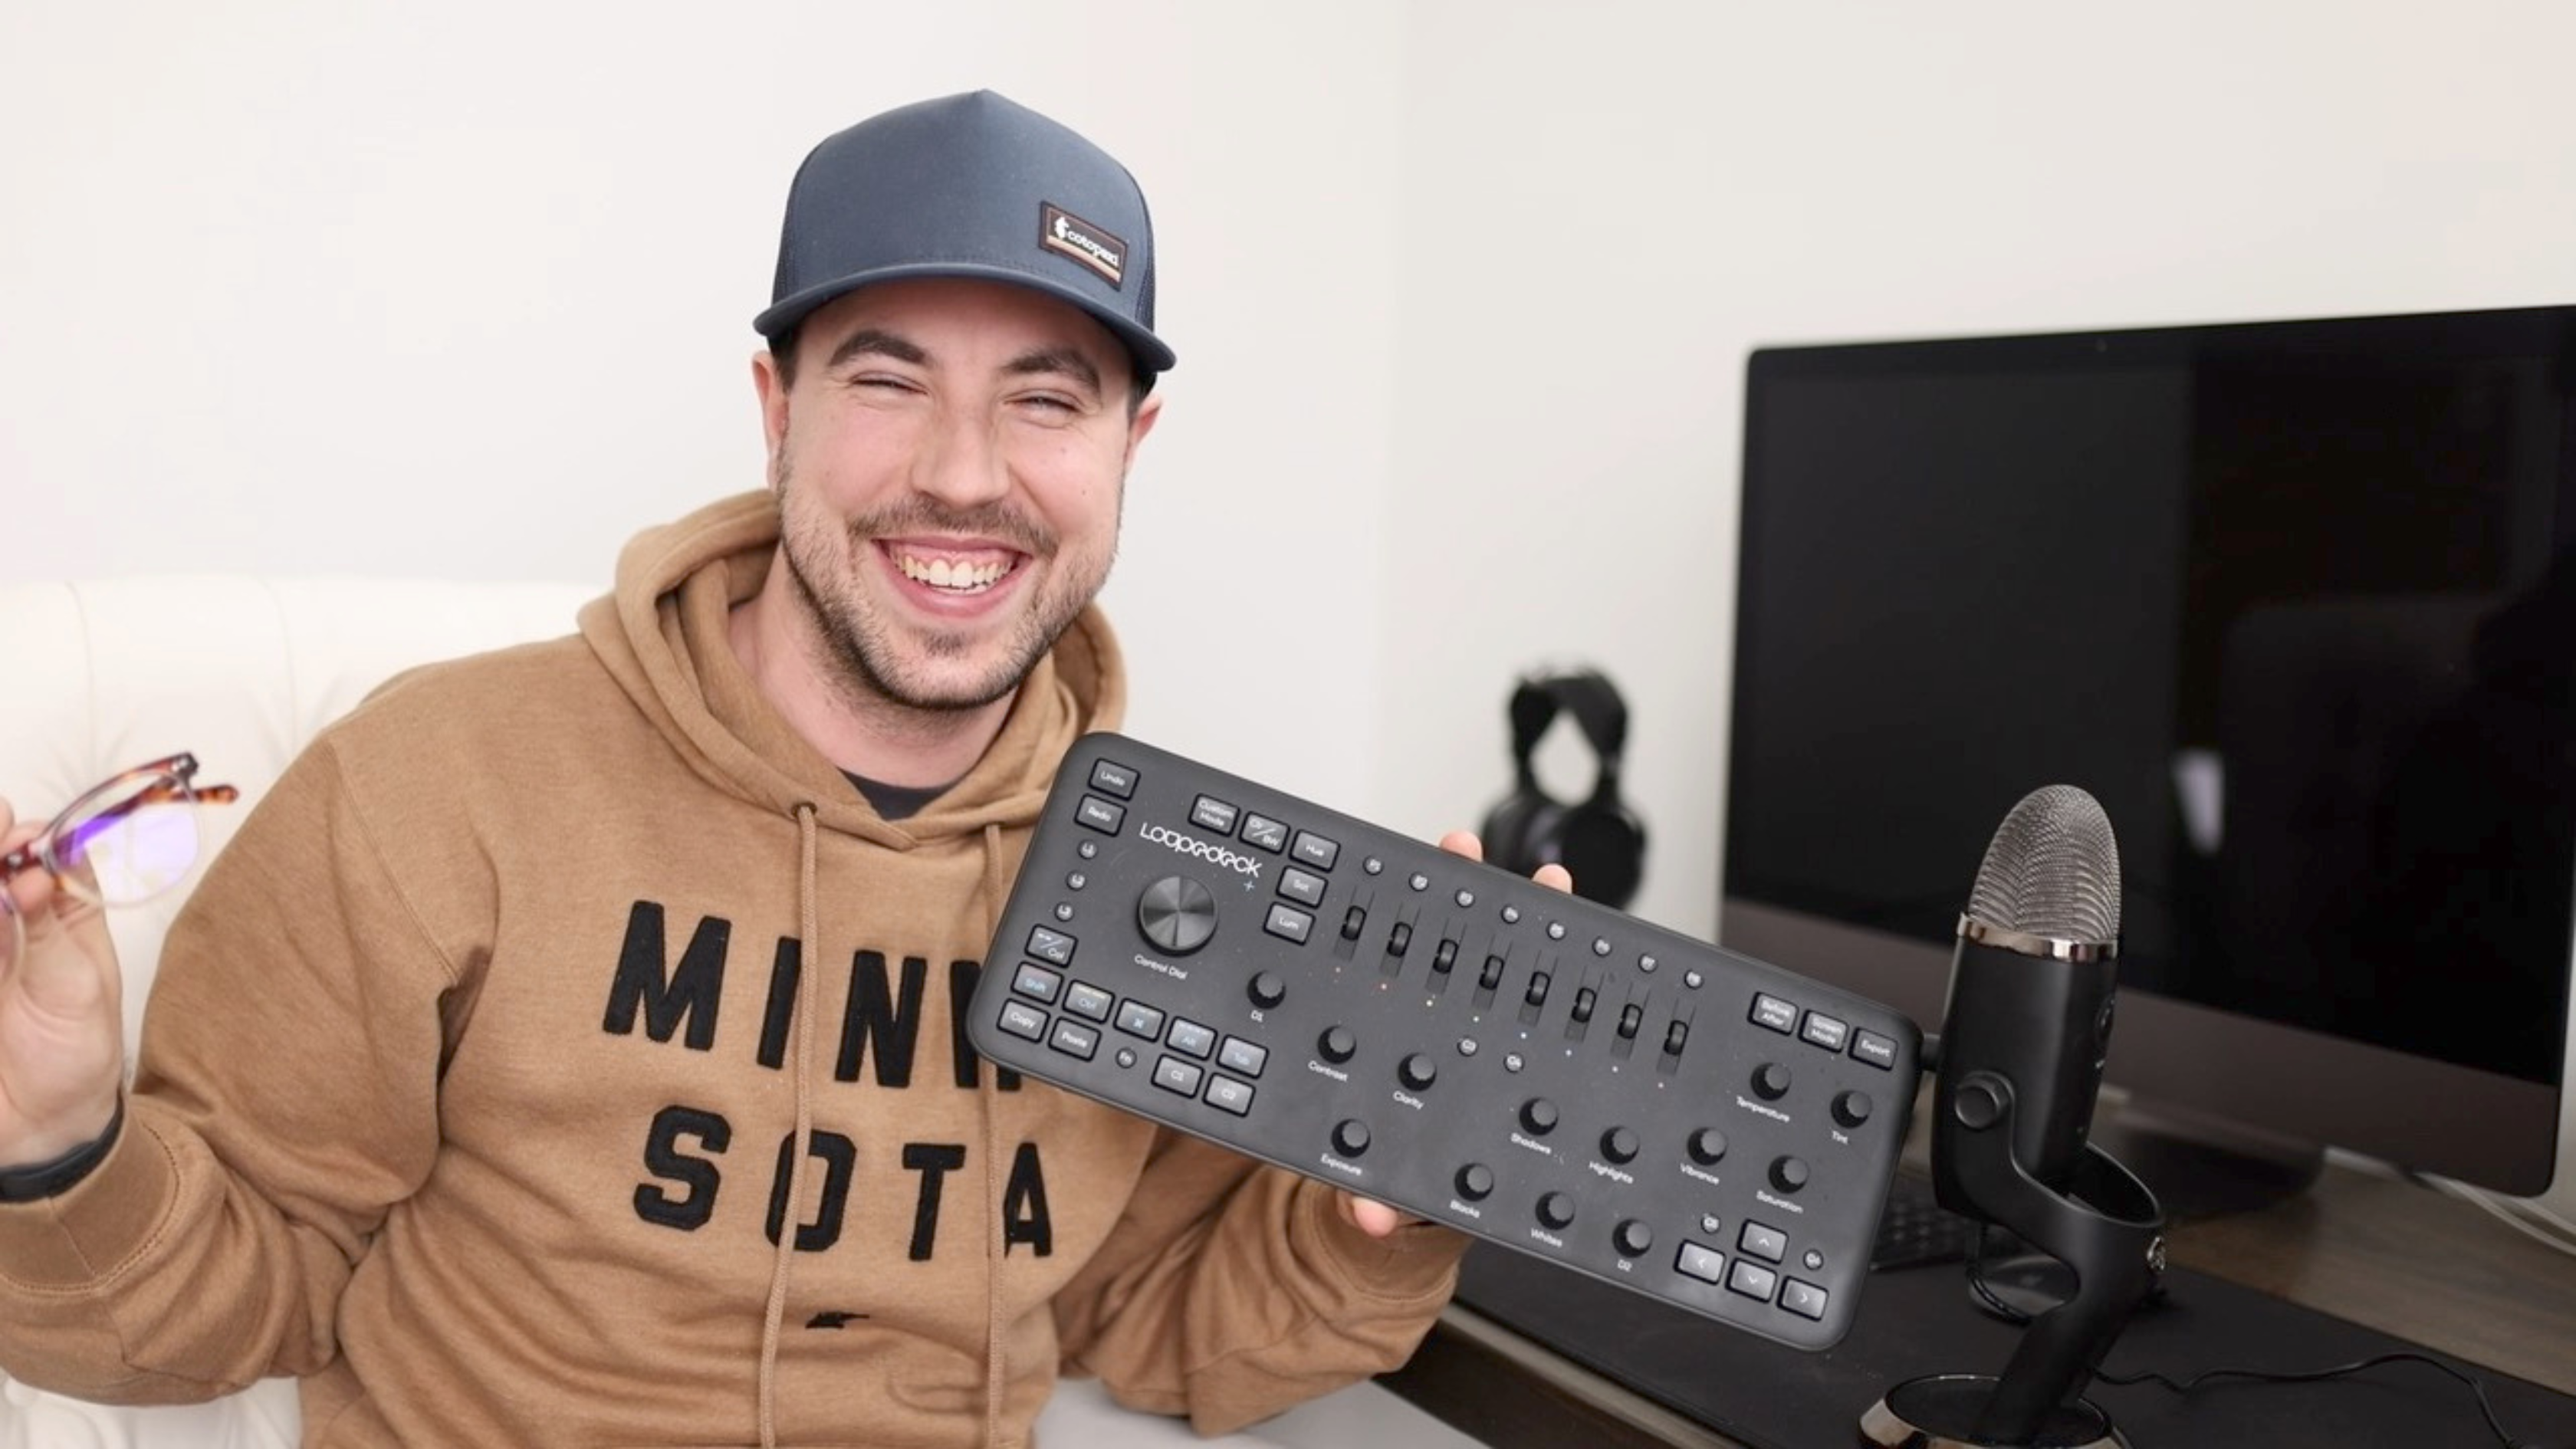 A photographer sitting in front of his desk holding up a Loupedeck, an editing tool for photography